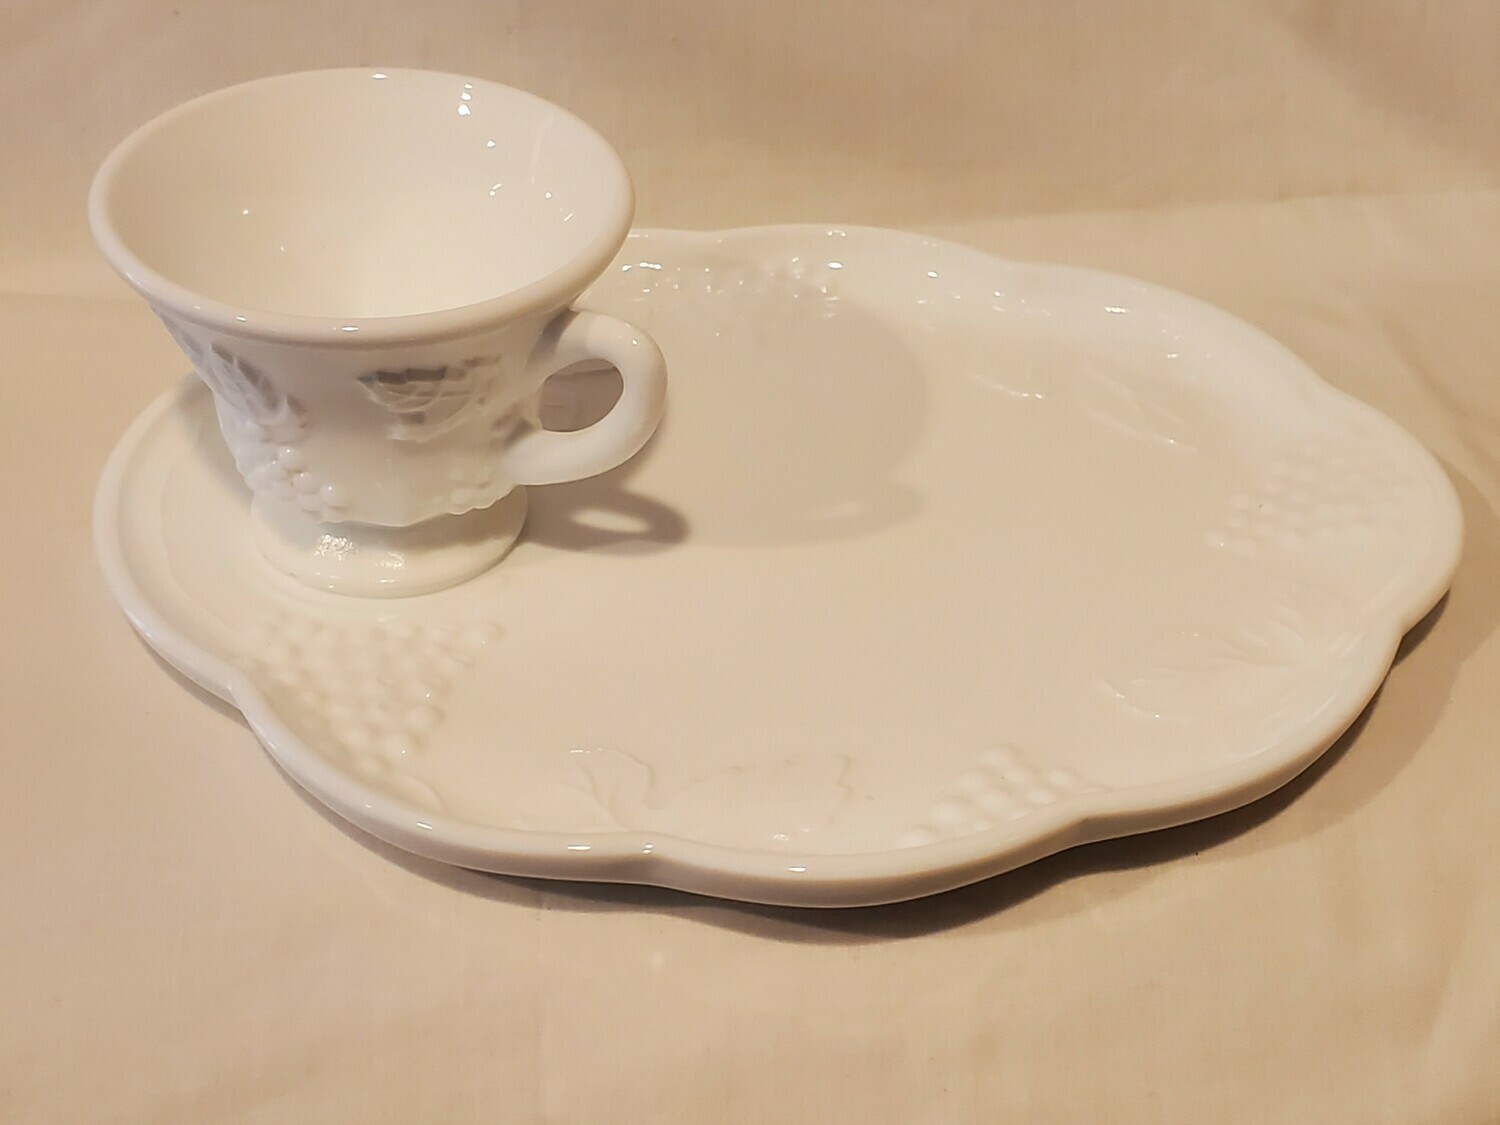 Plate & Punch/Snack Cup Set
2 PIECE set By Colony